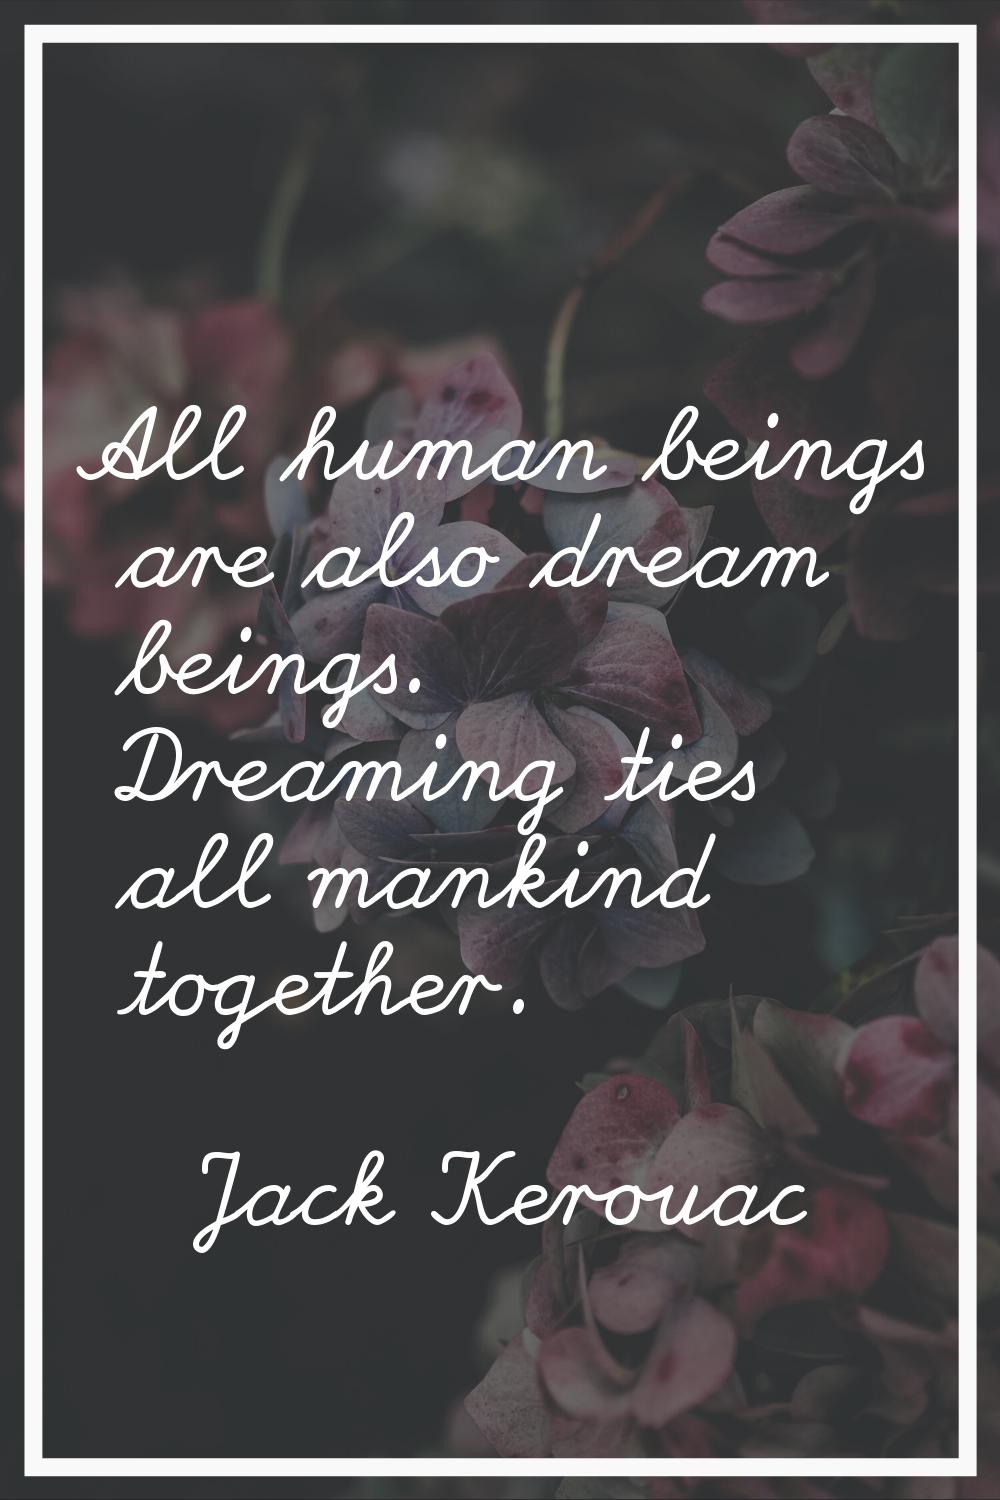 All human beings are also dream beings. Dreaming ties all mankind together.